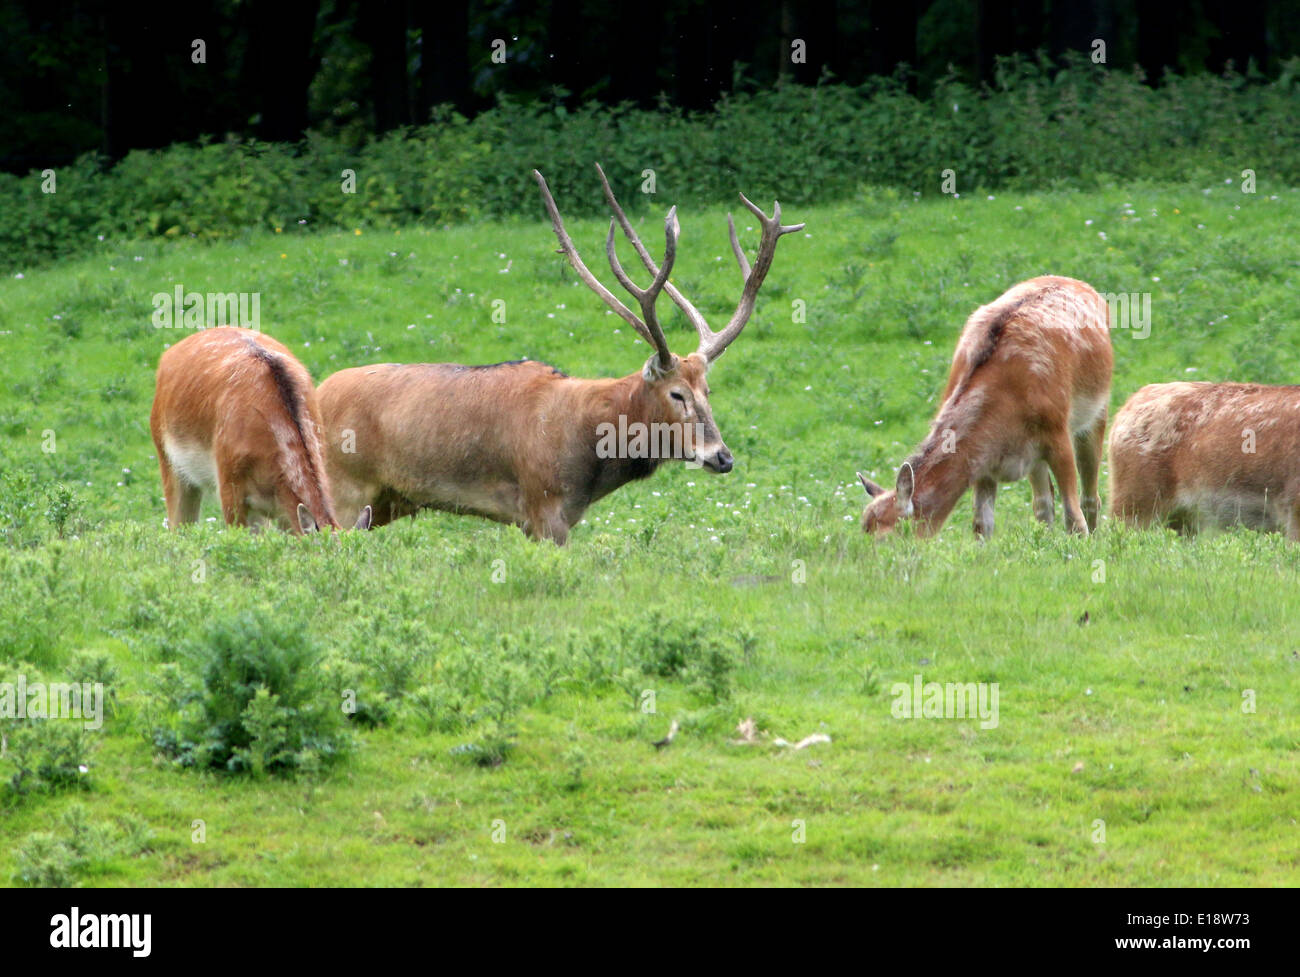 Group of Père David's deer (Elaphurus davidianus) , a.k.a. milu or elaphure, with a an antlered stag among them Stock Photo